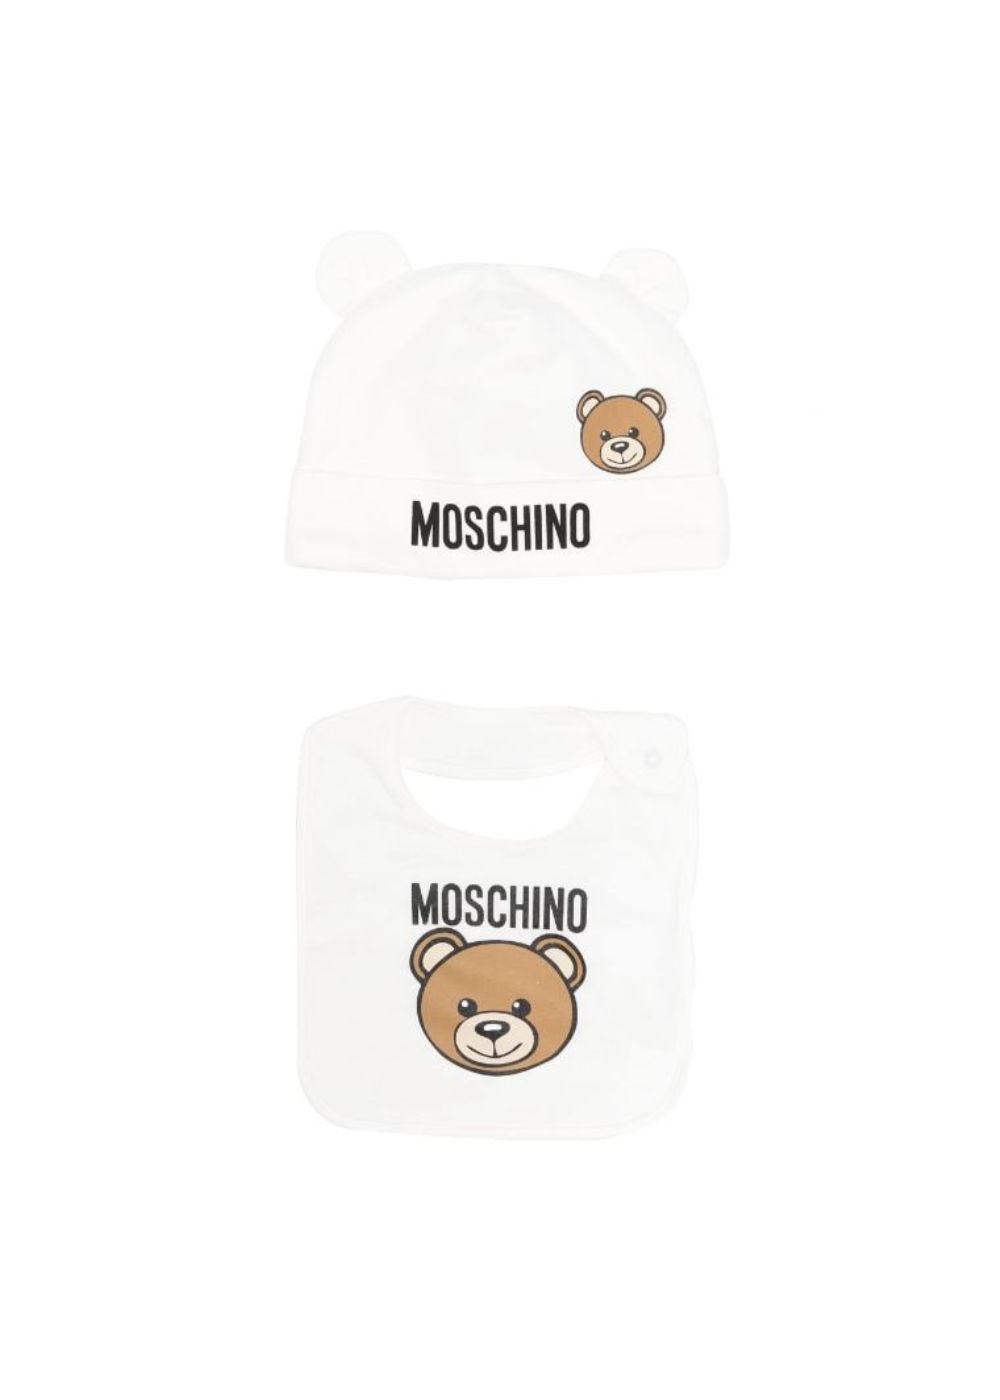 Featured image for “Moschino Set berretto Teddy Bear”